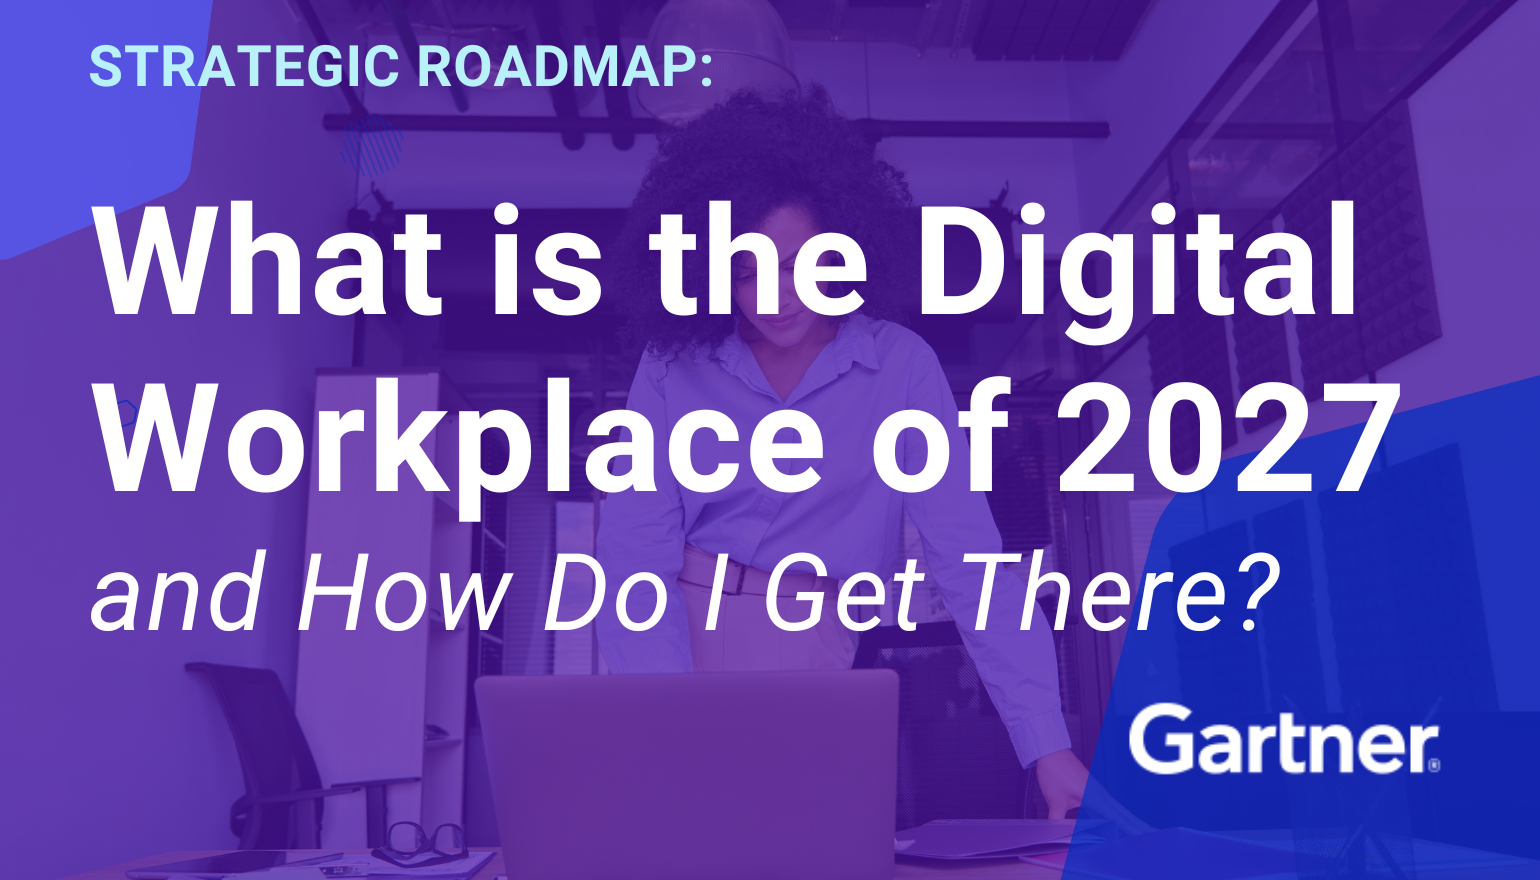 Gartner® Report, “Strategic Roadmap: What is the Digital Workplace of 2027 and How Do I Get There?”